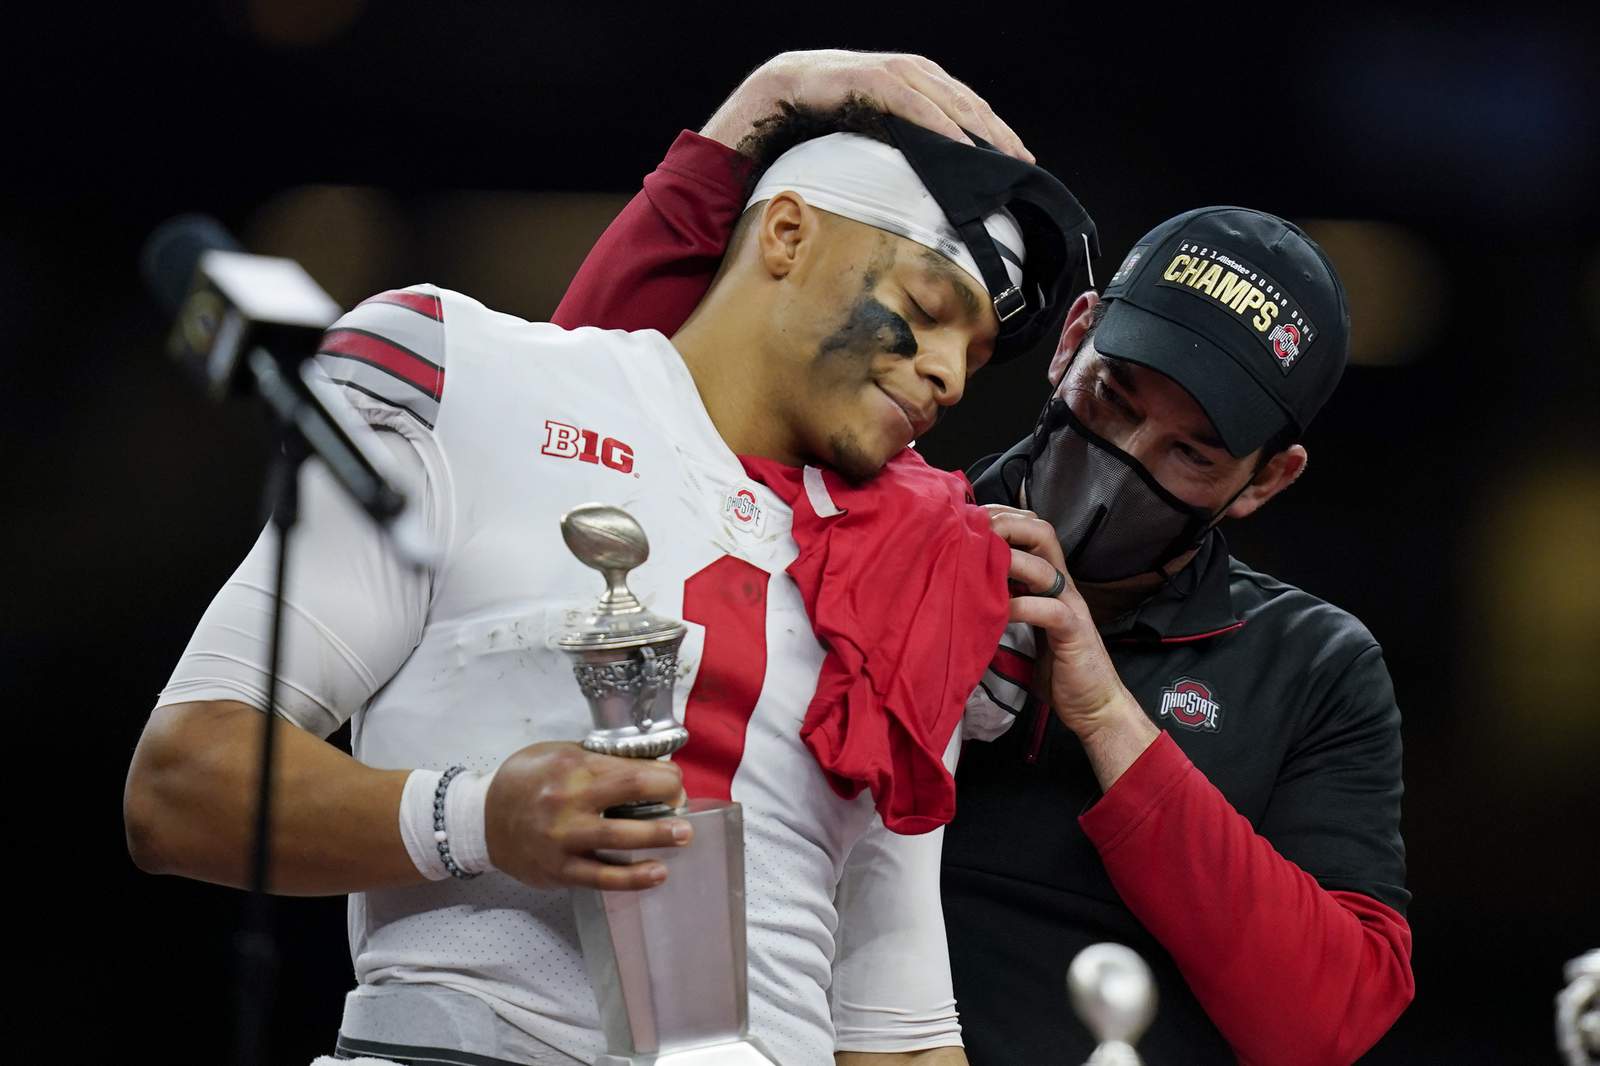 Reported virus issues at Ohio St raise specter of CFP delay